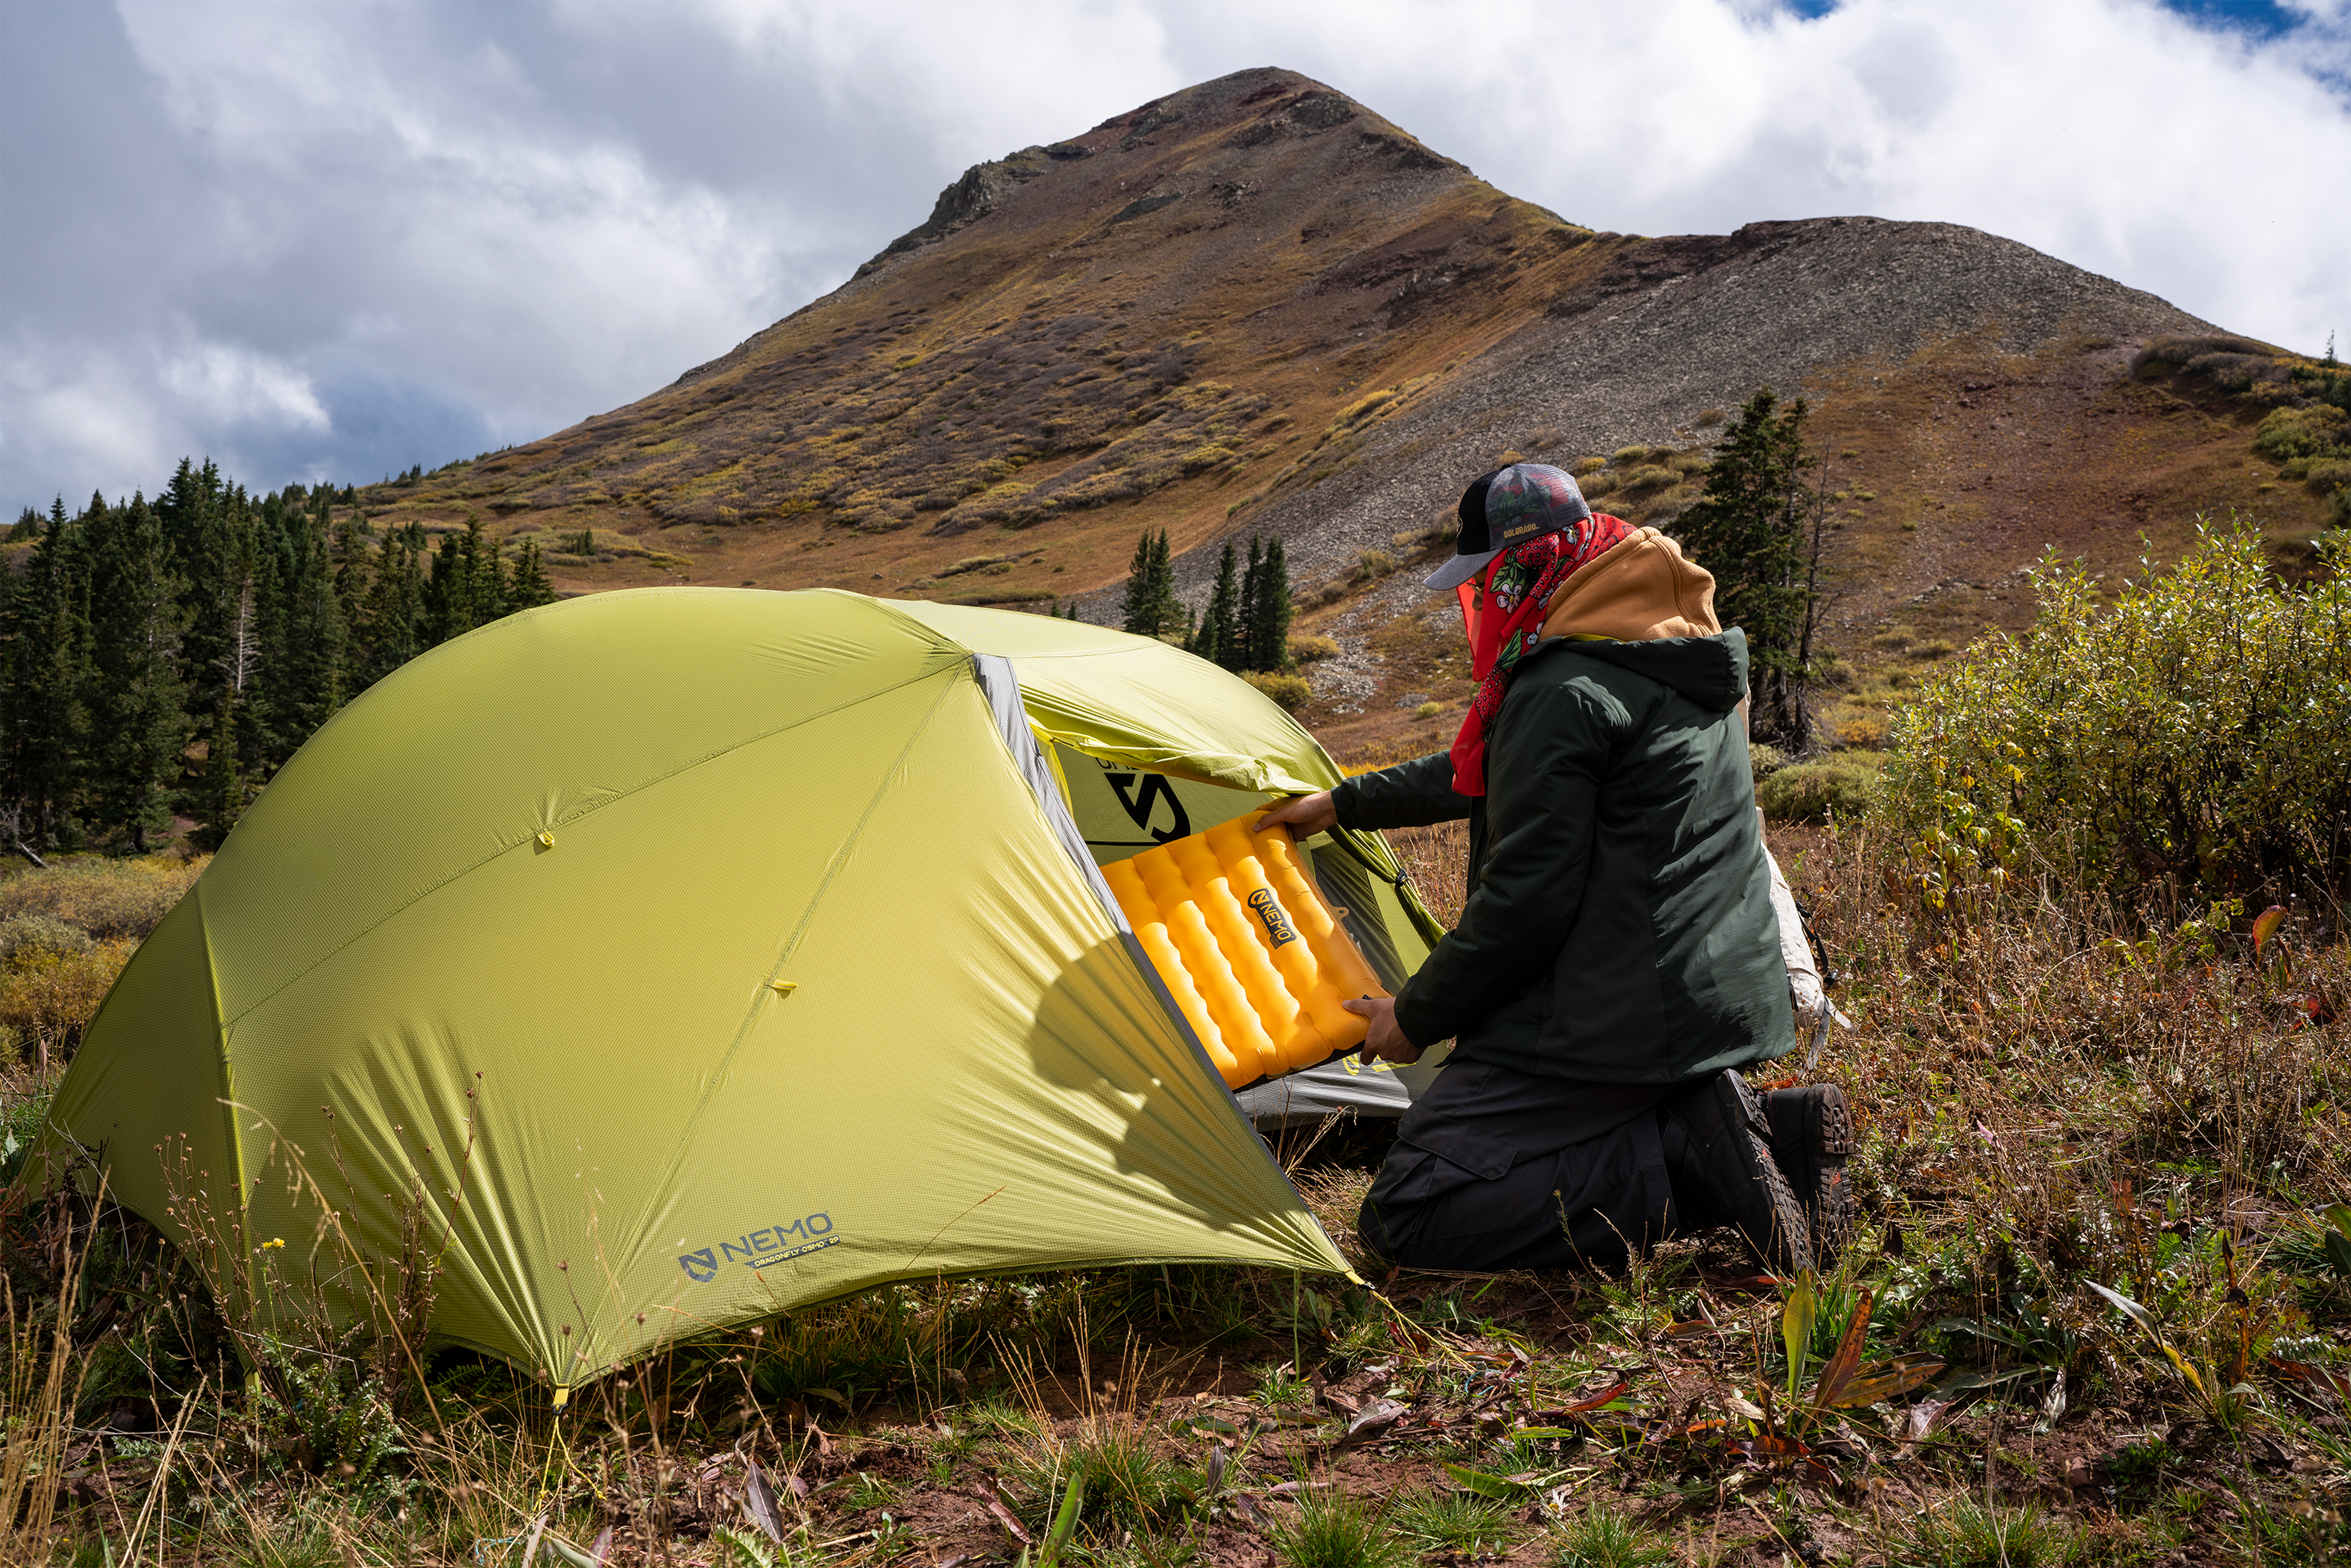 Dragonfly OSMO™ 2-Person Ultralight Backpacking Tent